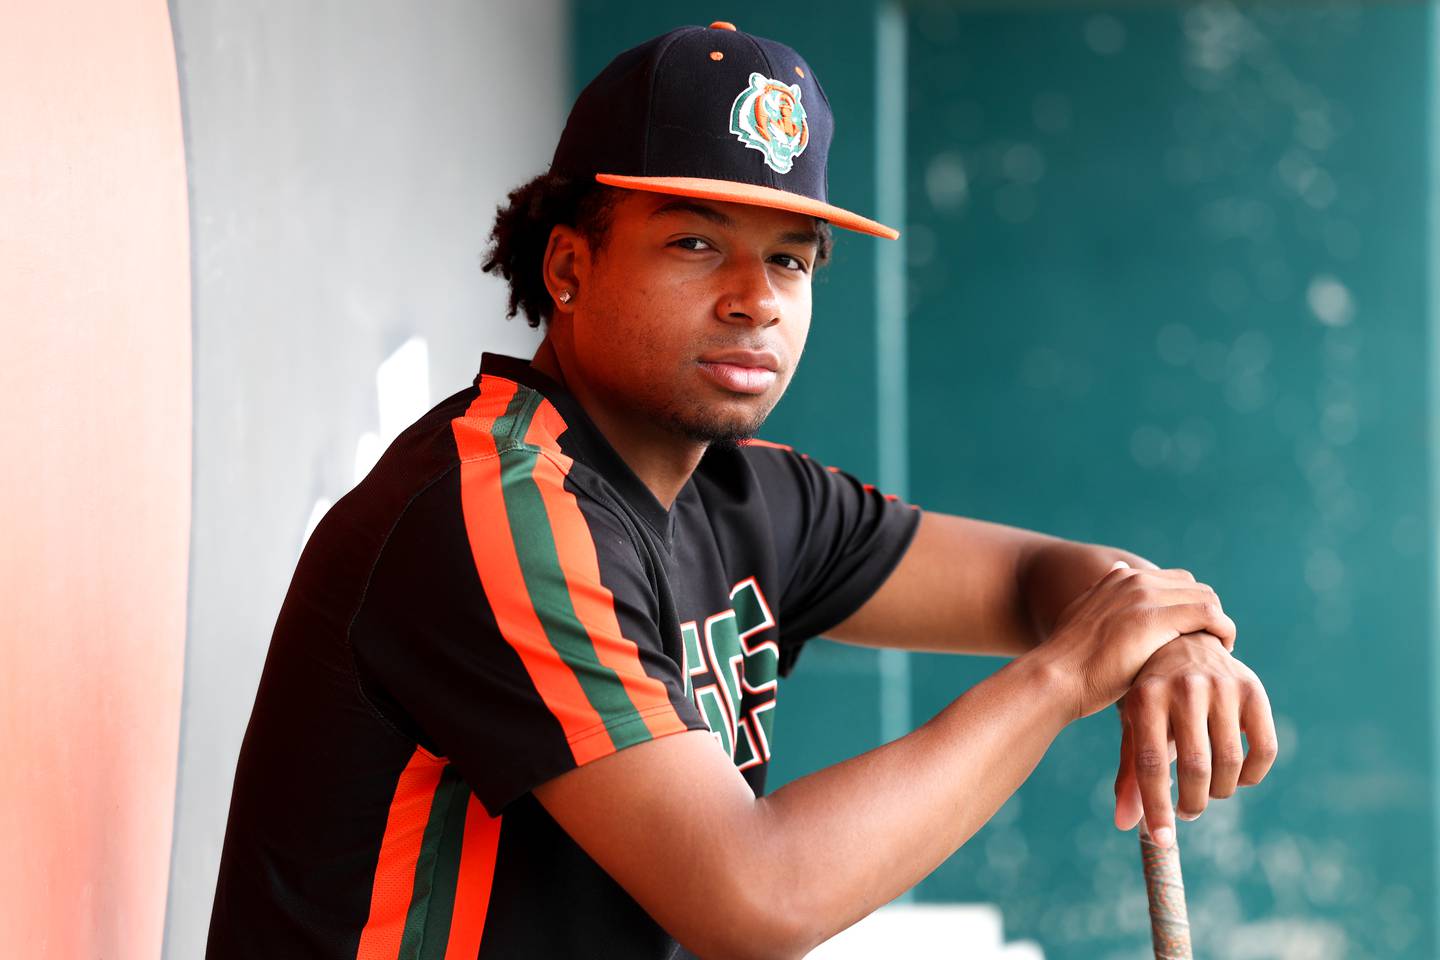 Plainfield East’s Christian Mitchelle is named The Herald-News baseball Player of the Year. Mitchelle was also named Southwest Prairie Conference East Division Most Valuable Player and Most Valuable Pitcher. Wednesday, June 22, 2022 in Plainfield.